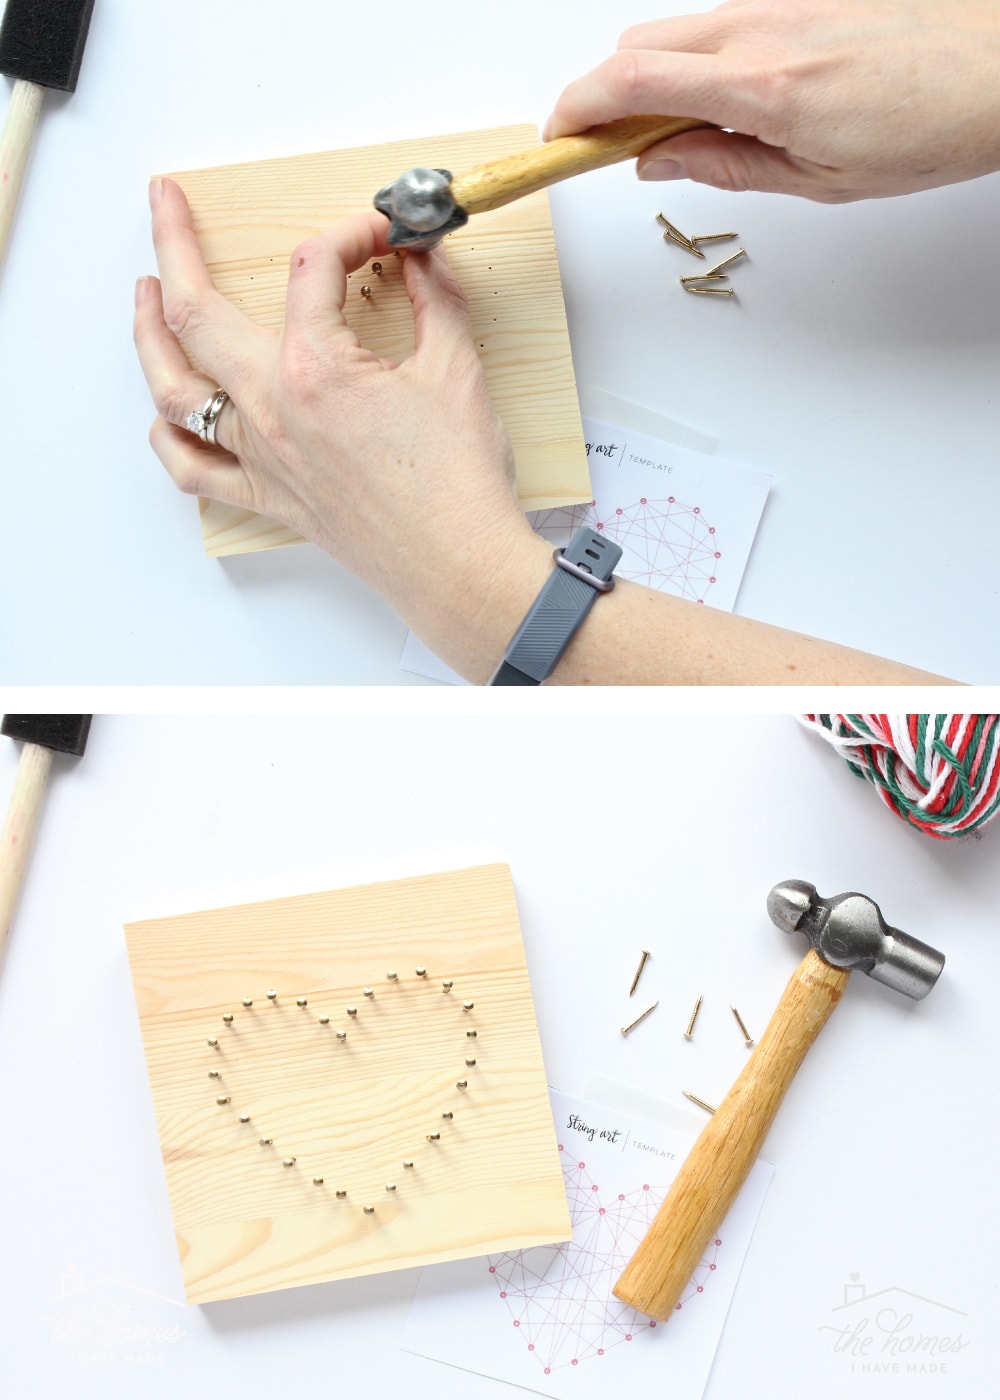 45 Best Nail String Art Ideas and Projects - Craftionary